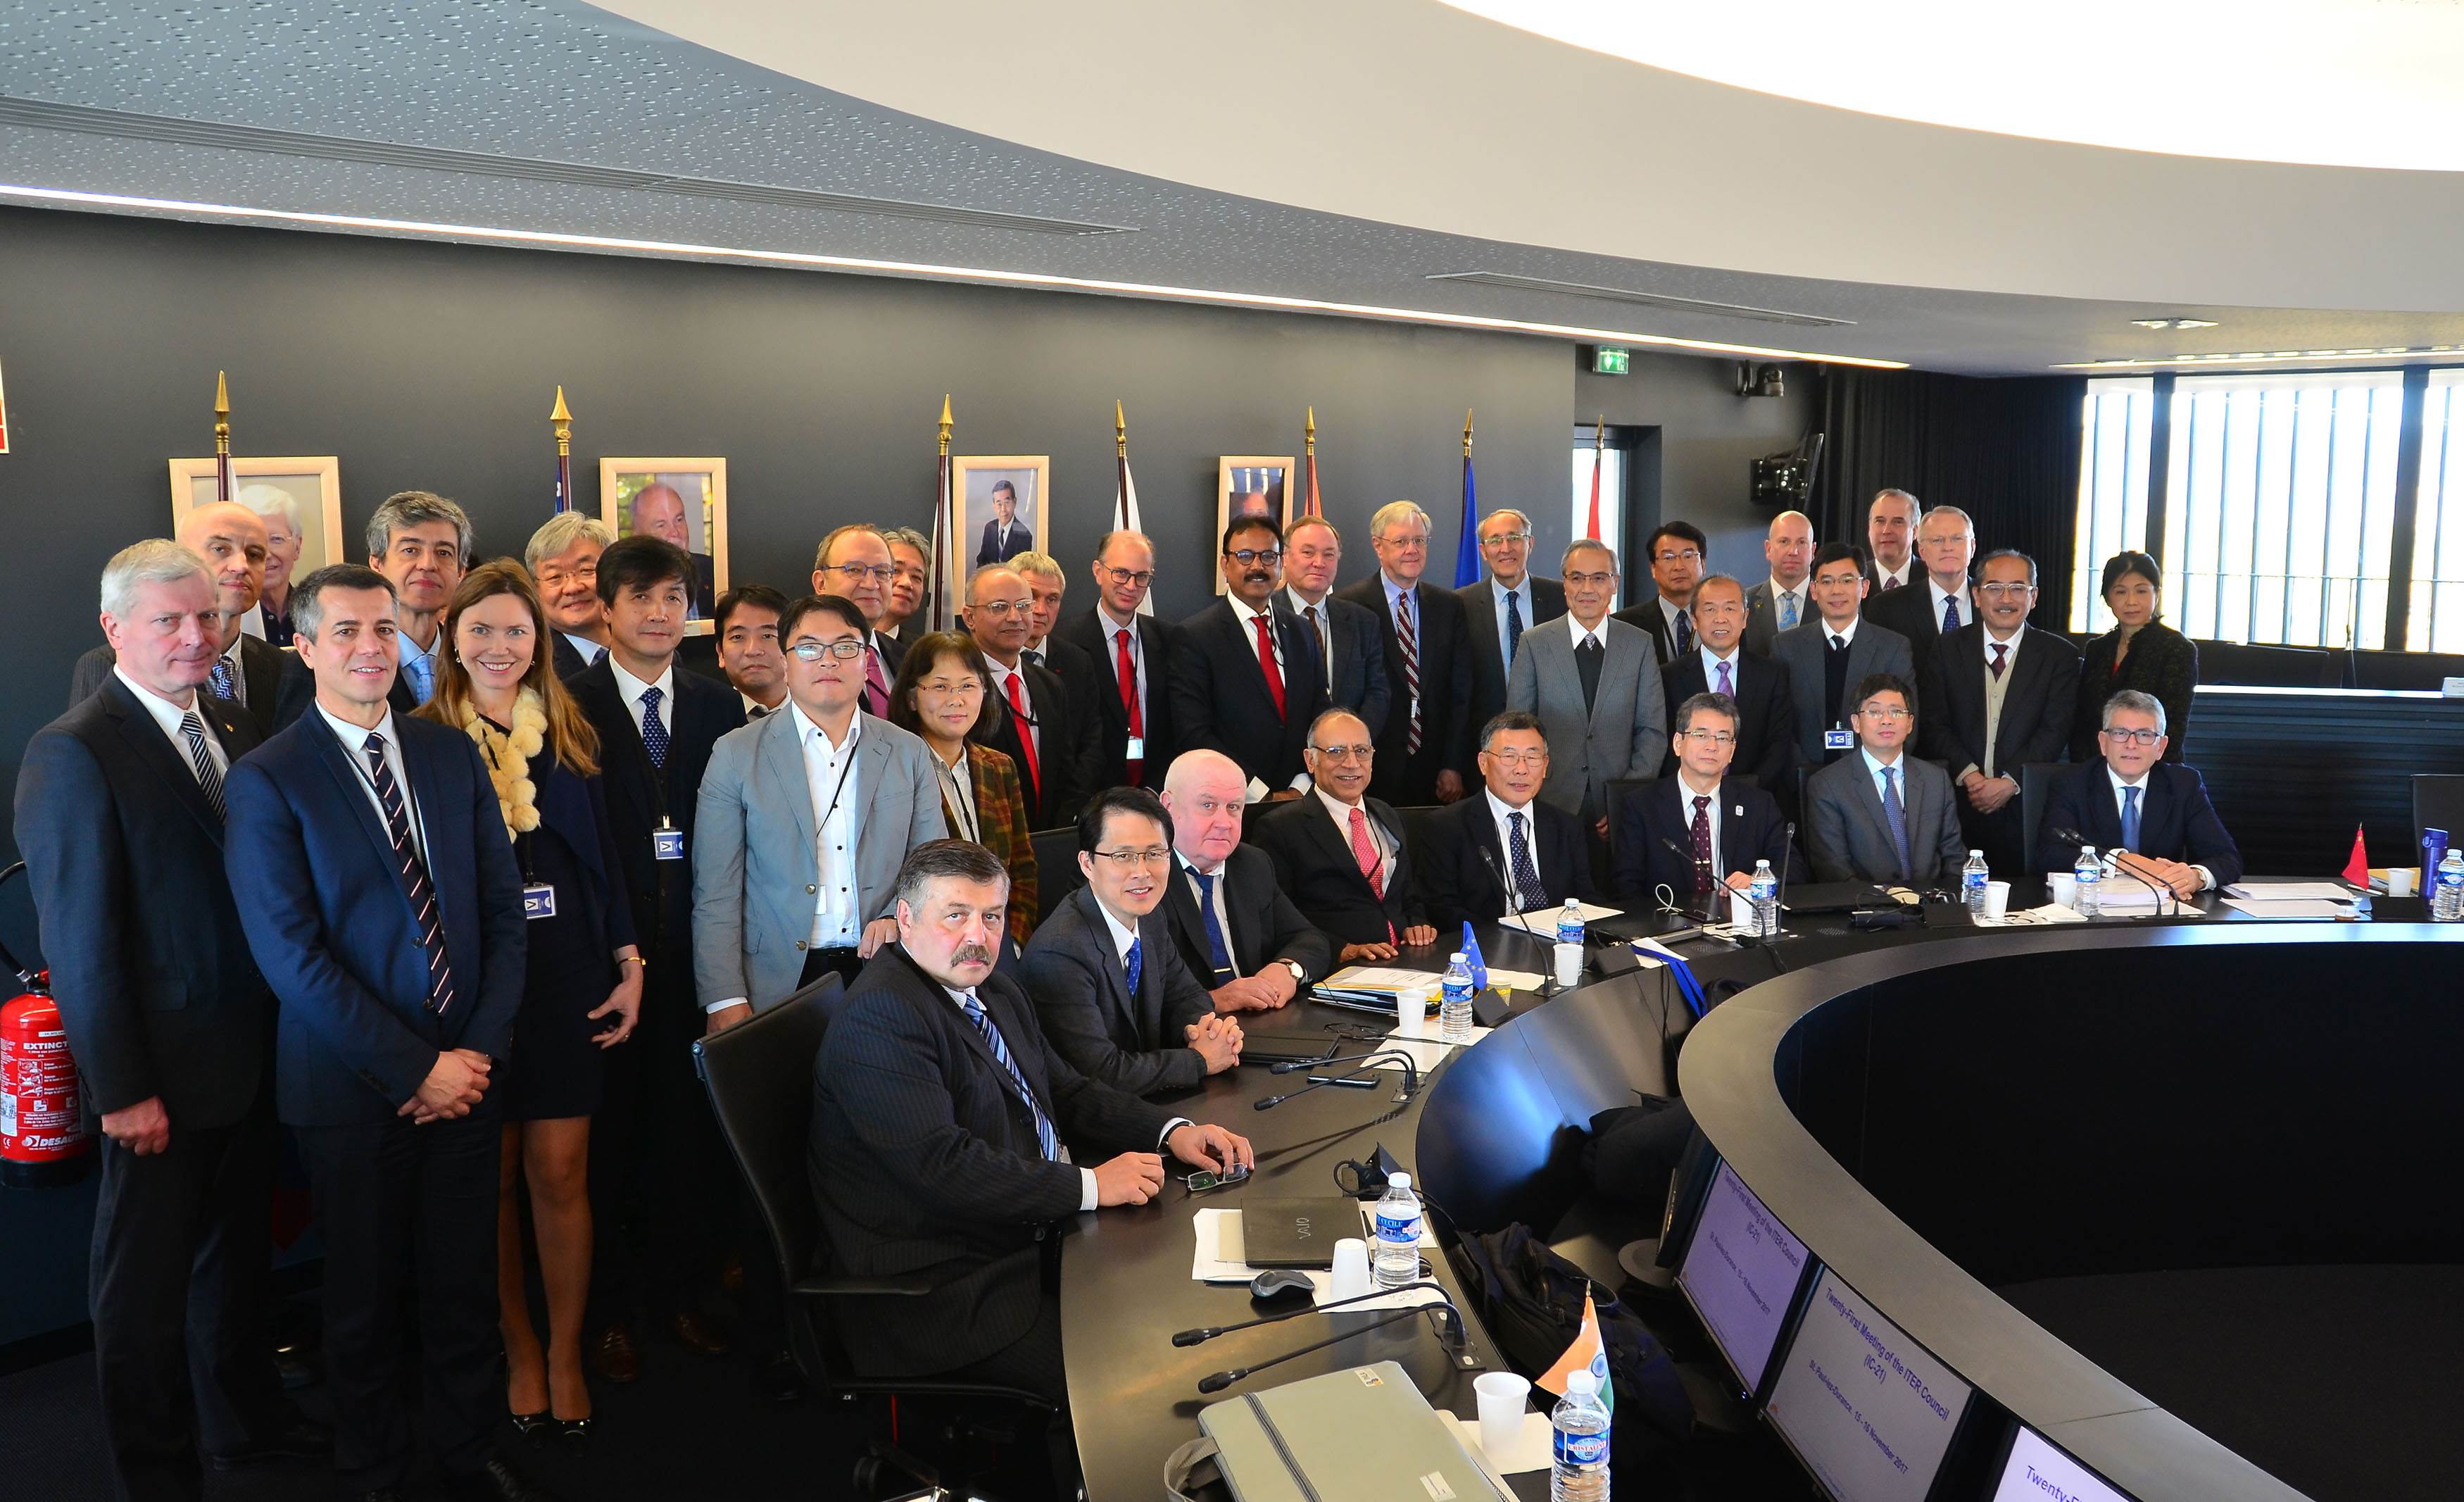 21st ITER Council affirms steady, measurable project progress